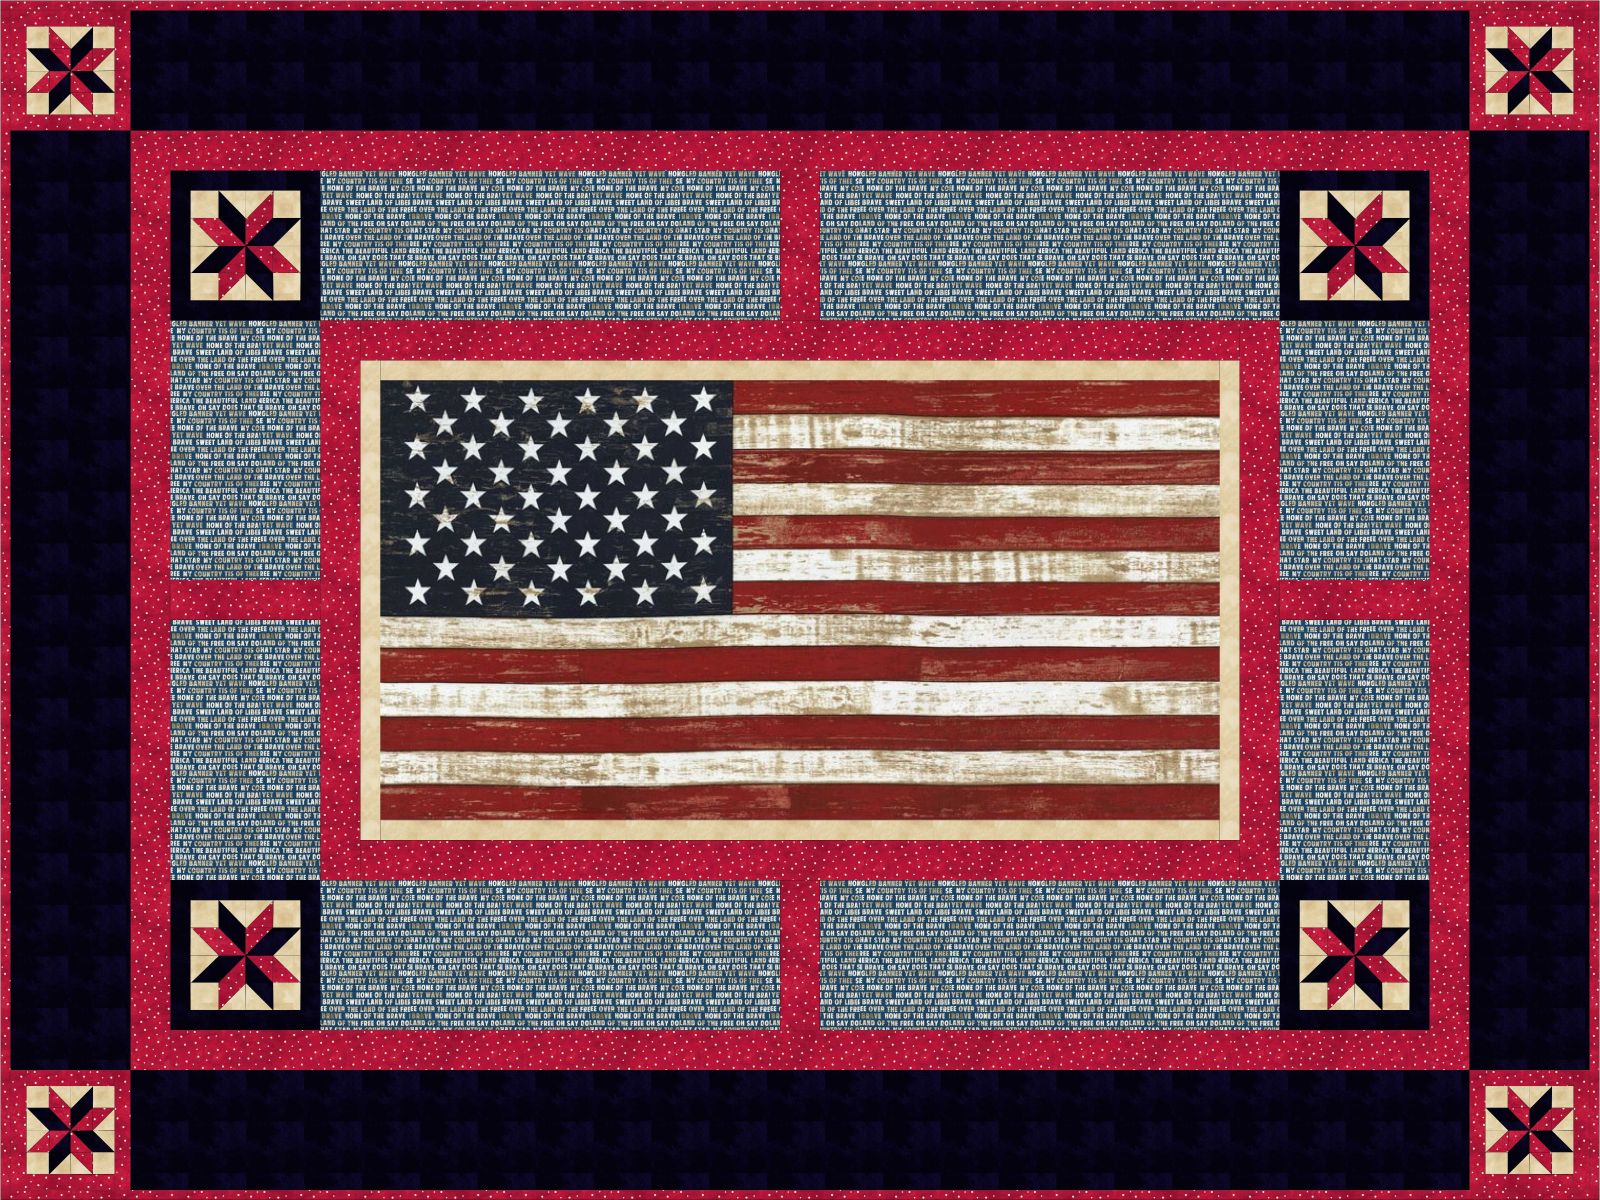 “American Pride” Free Quilts of Valor Pattern designed by Debbie Chambers from the Quilts of Valor Foundation